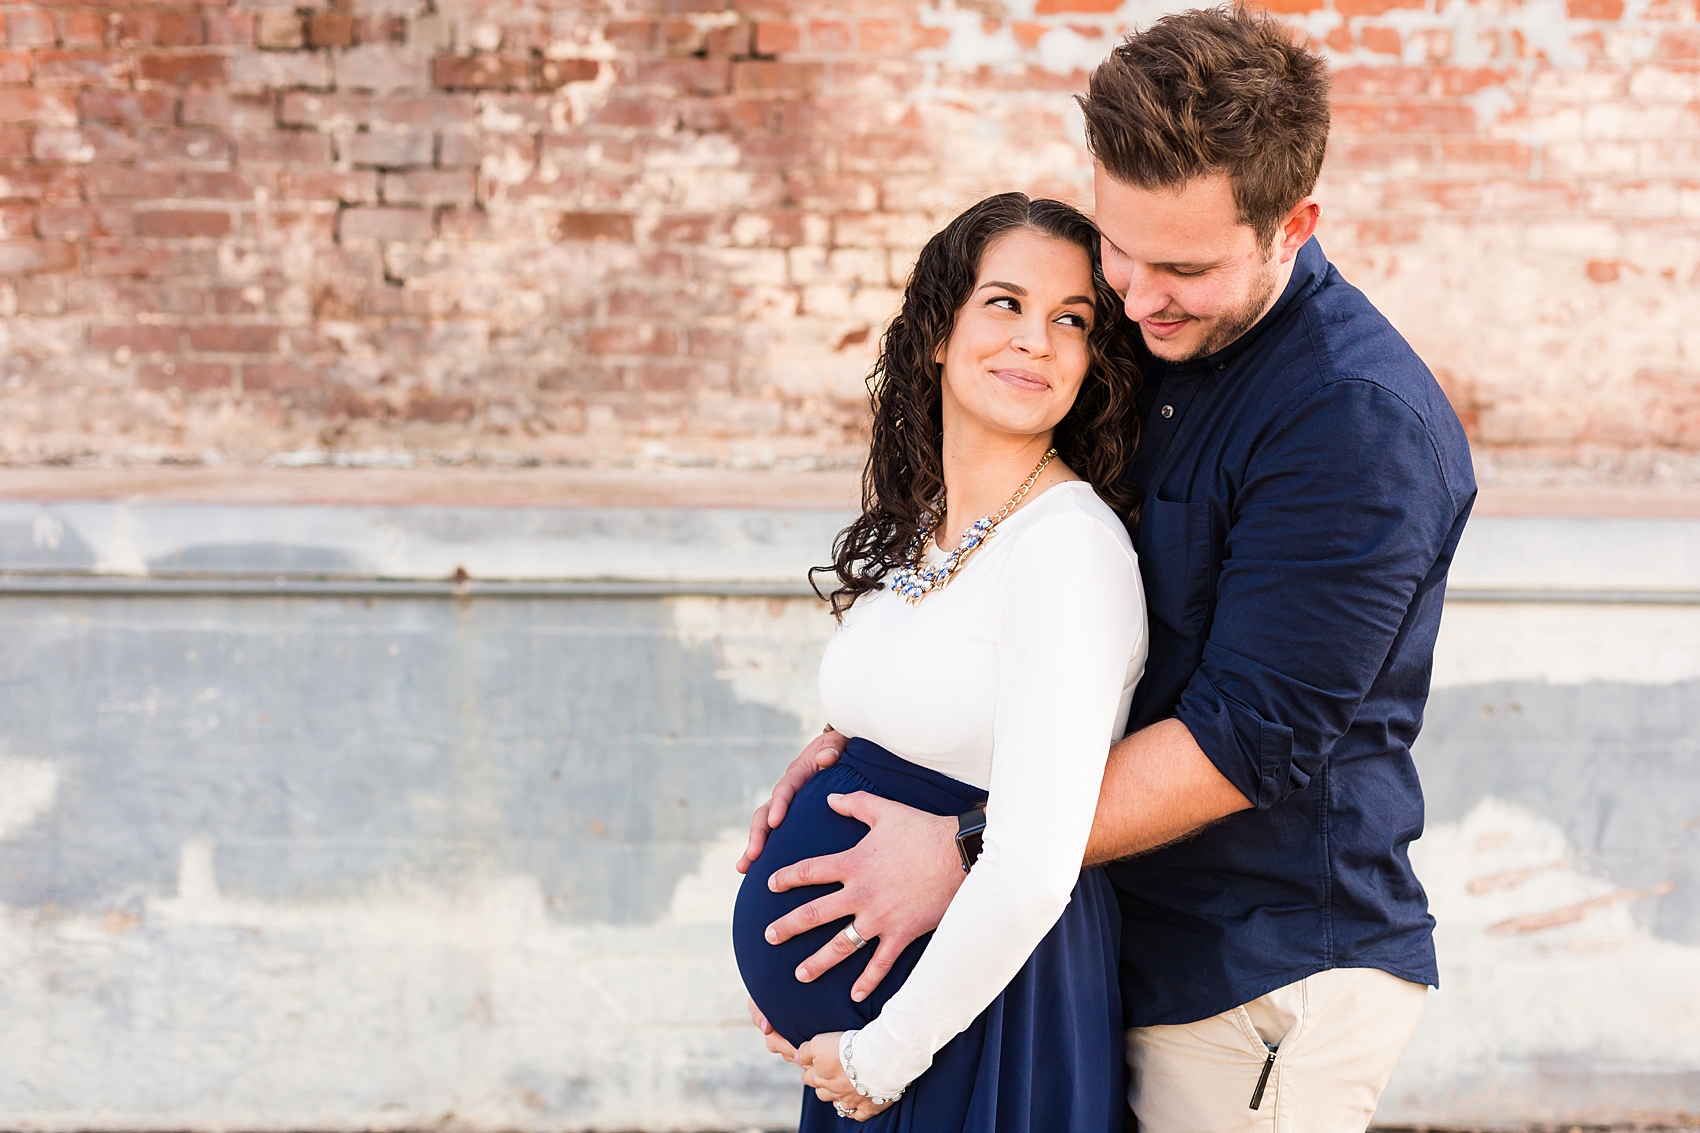 Leah Hope Photography | Downtown Phoenix Arizona Urban Warehouse Maternity Family Pictures